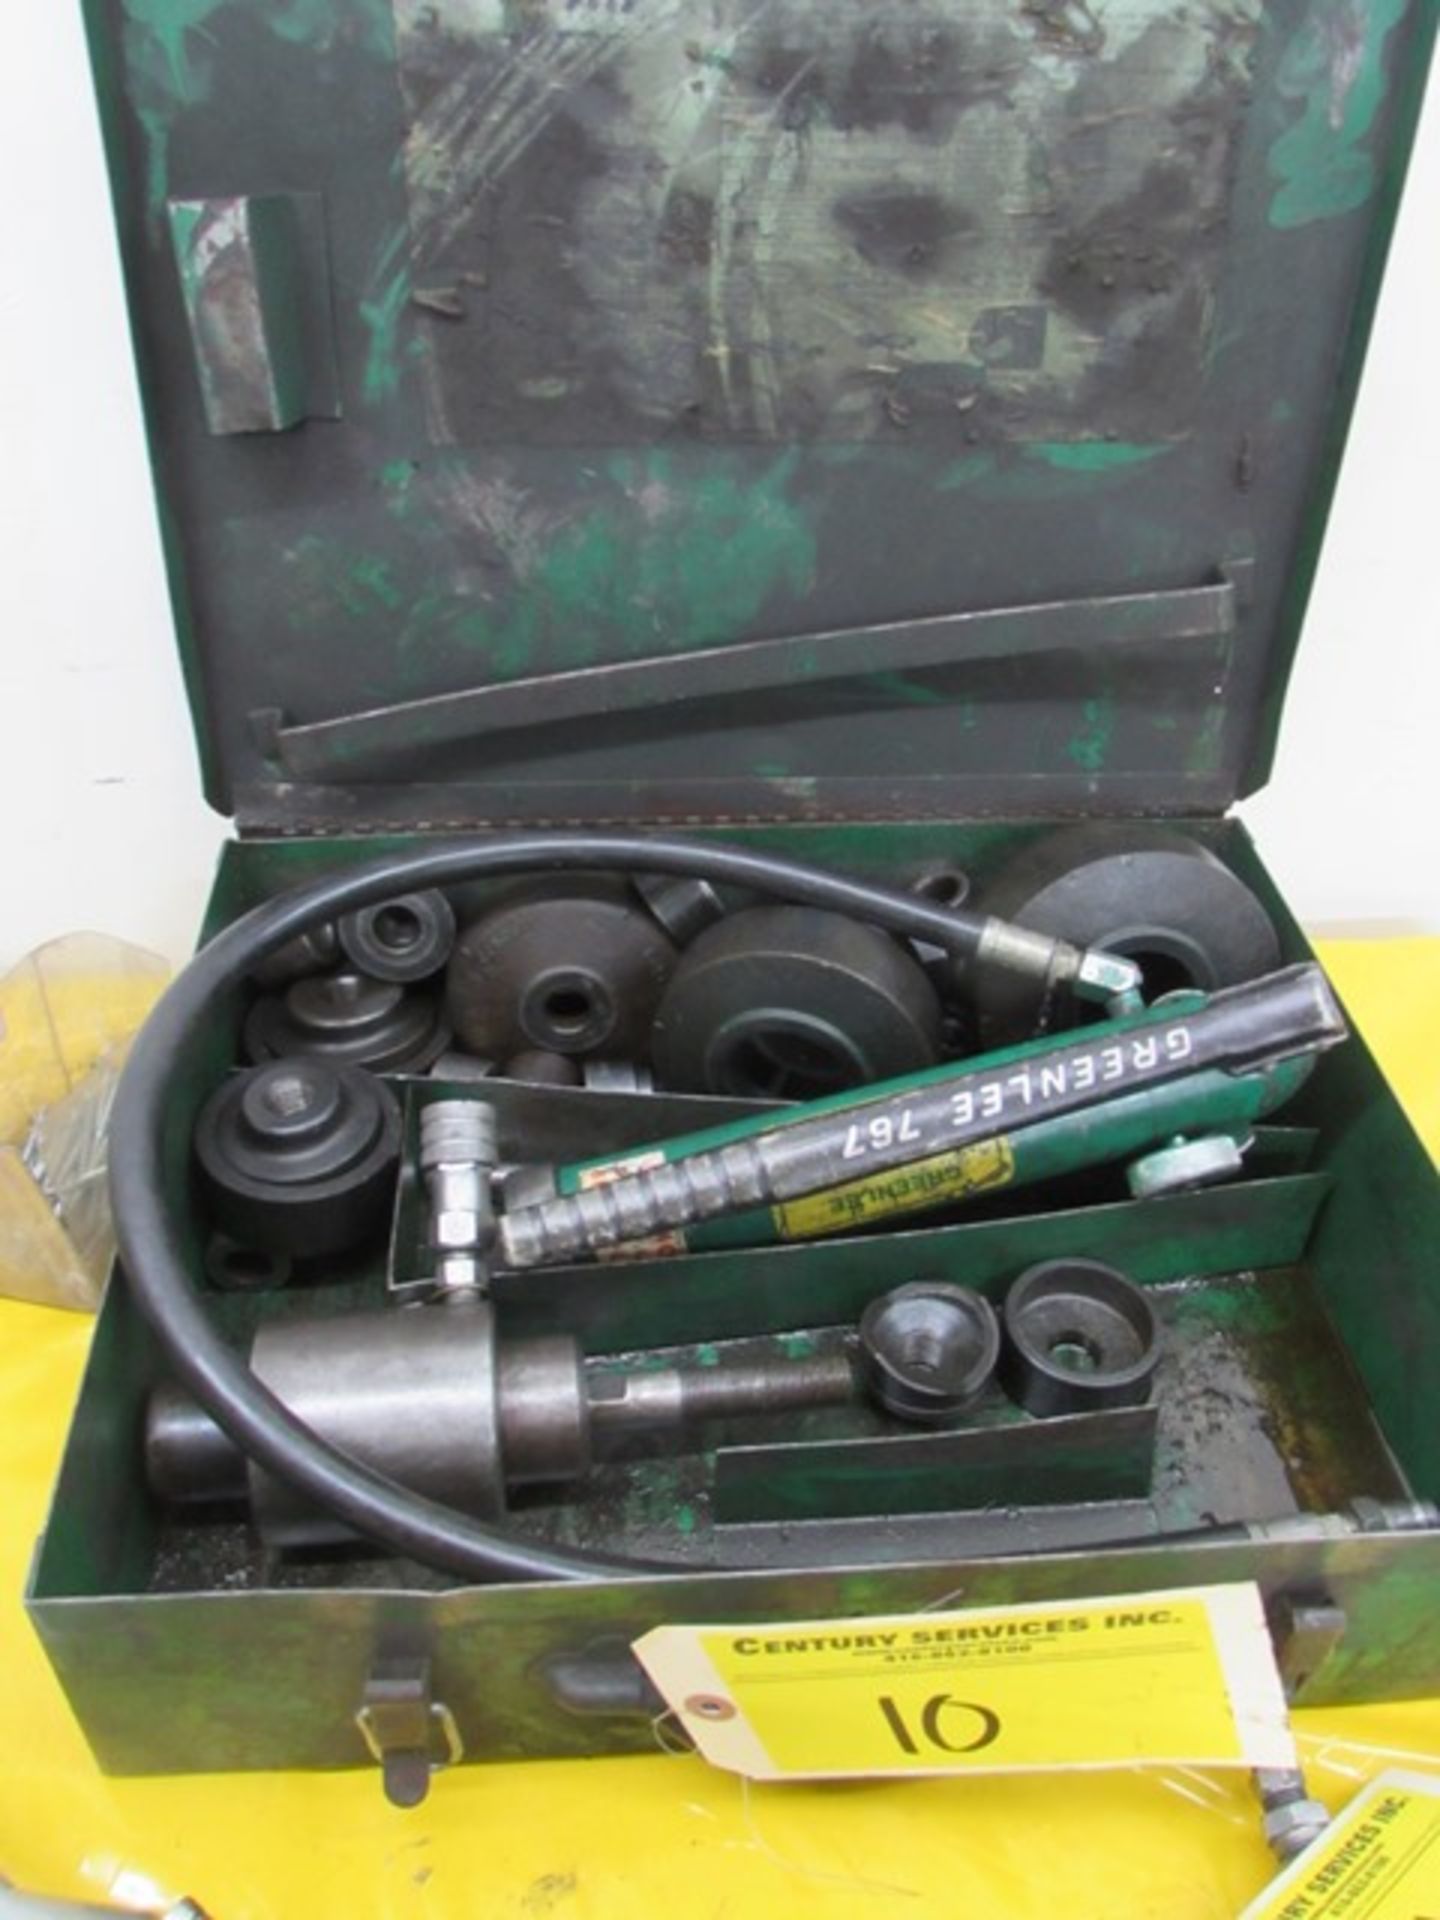 Greenline Knockout Punch pneumatic driver set